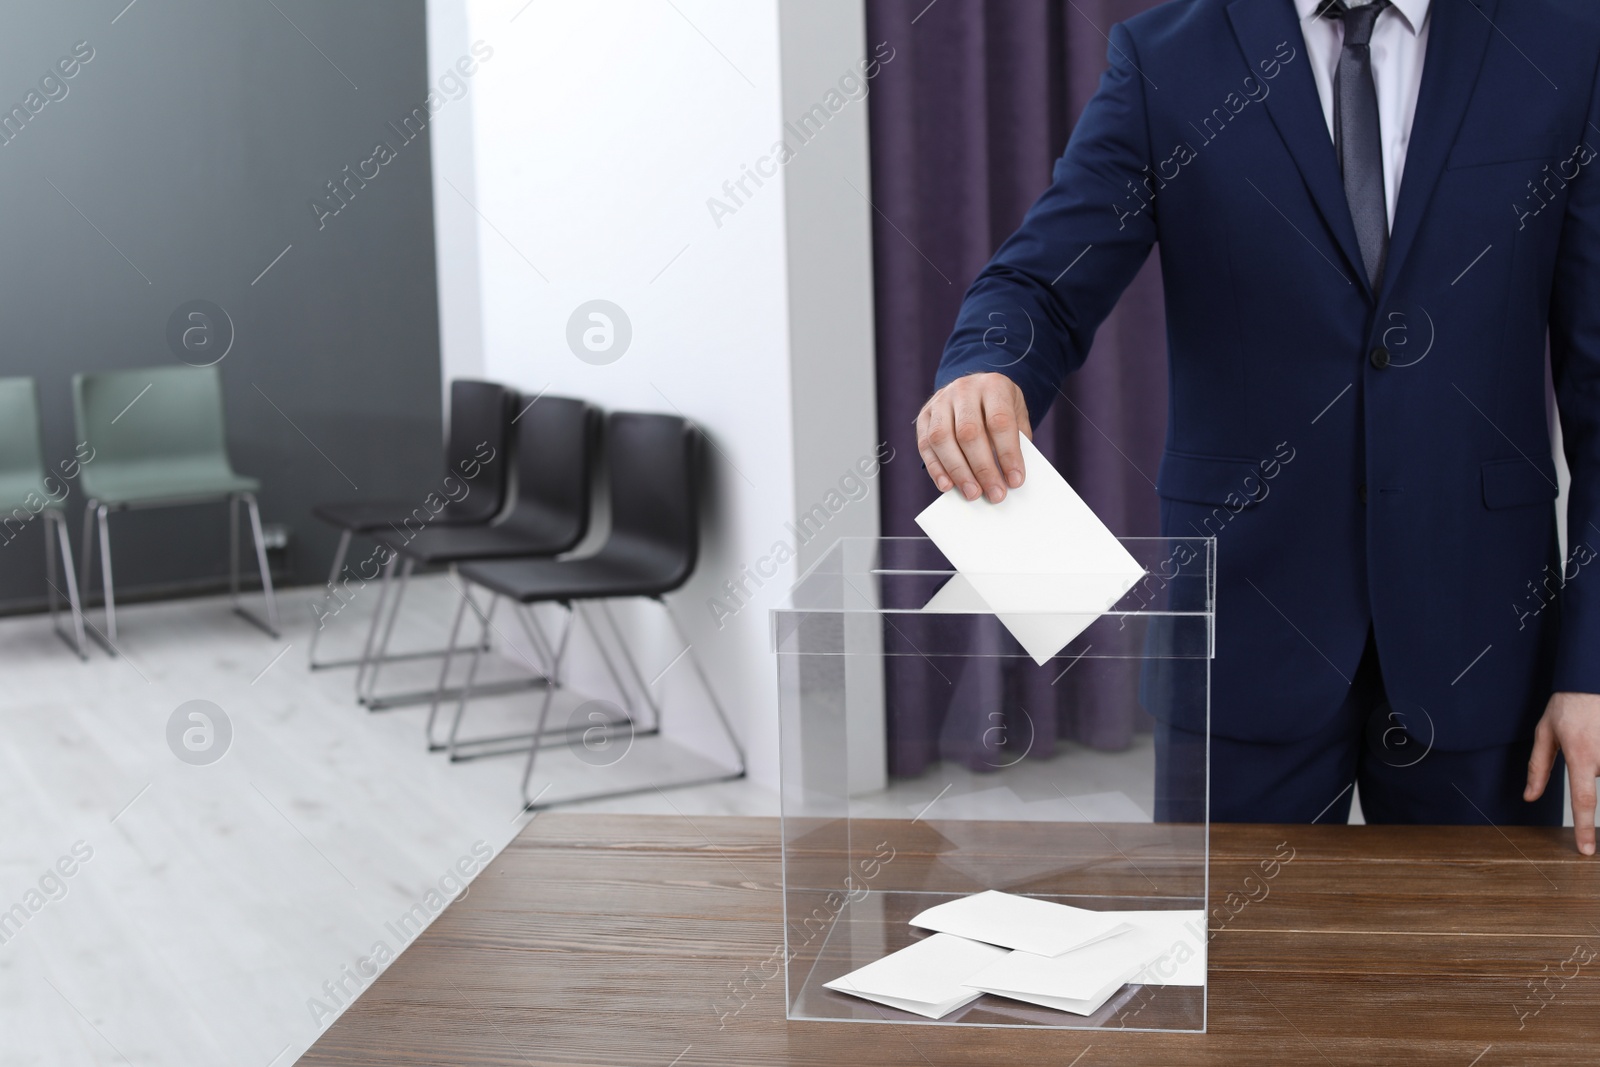 Photo of Man putting his vote into ballot box at polling station, closeup. Space for text